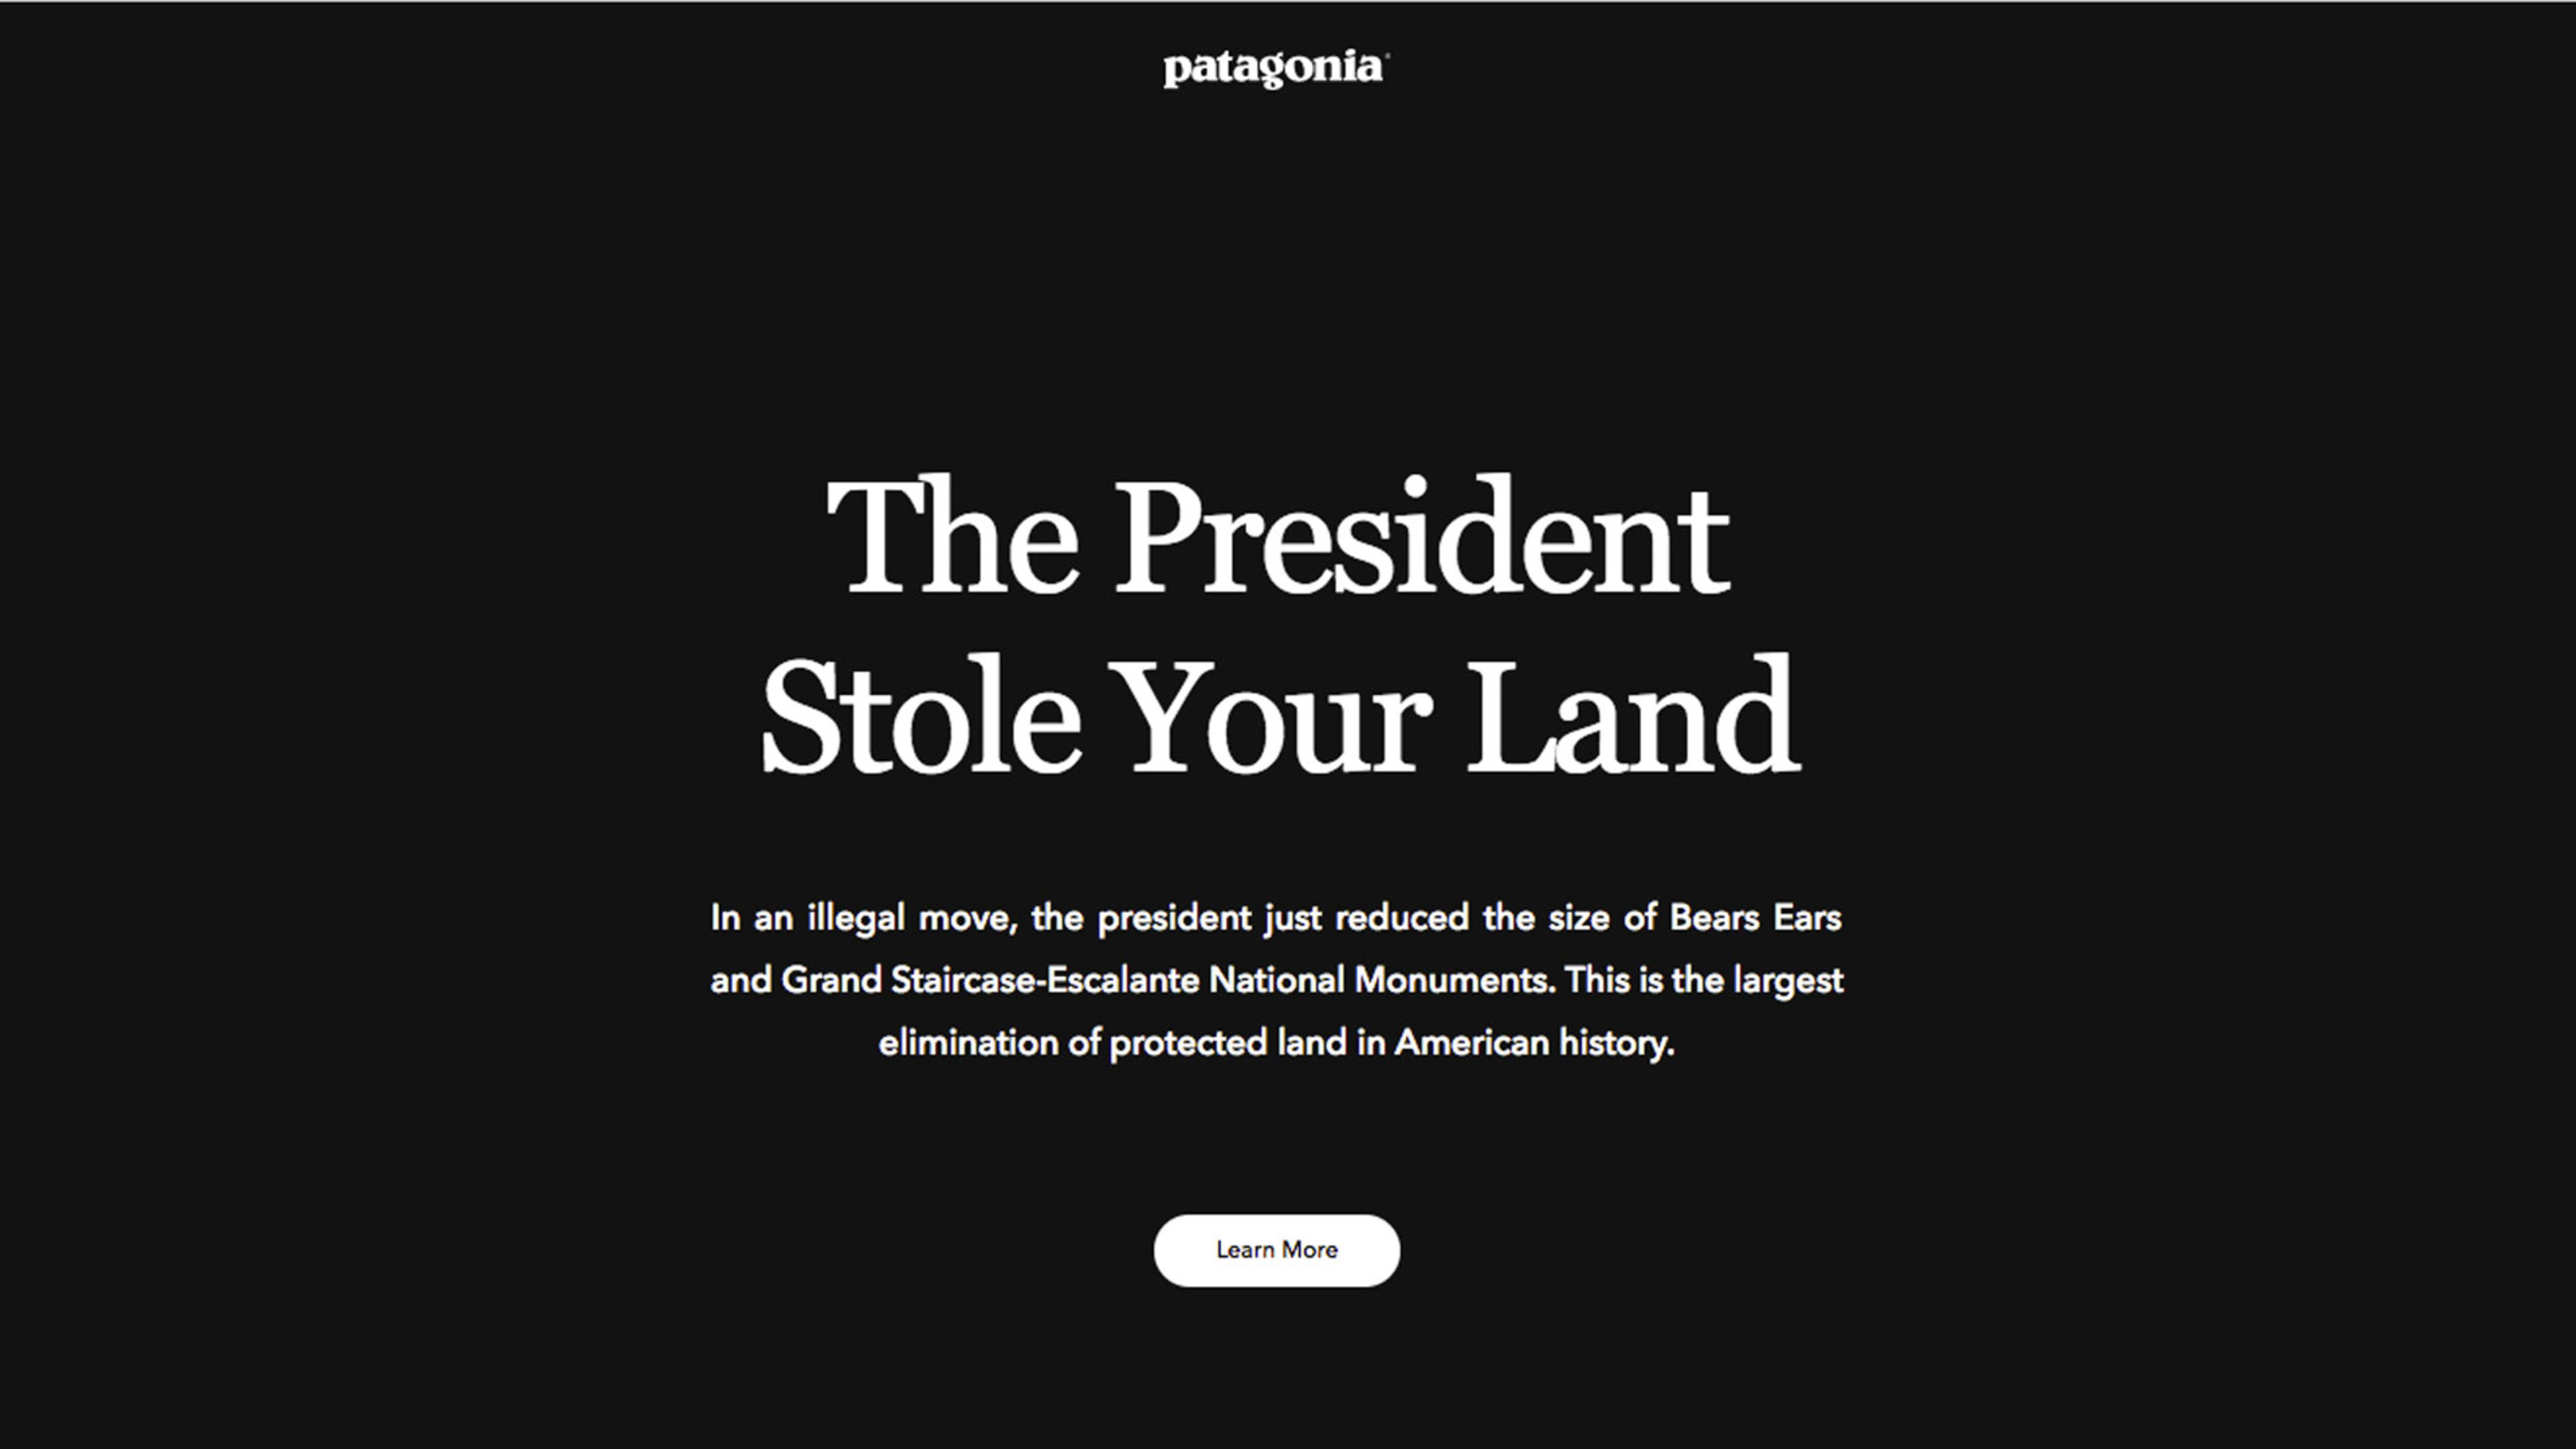 Patagonia accuses President Trump of stealing public lands